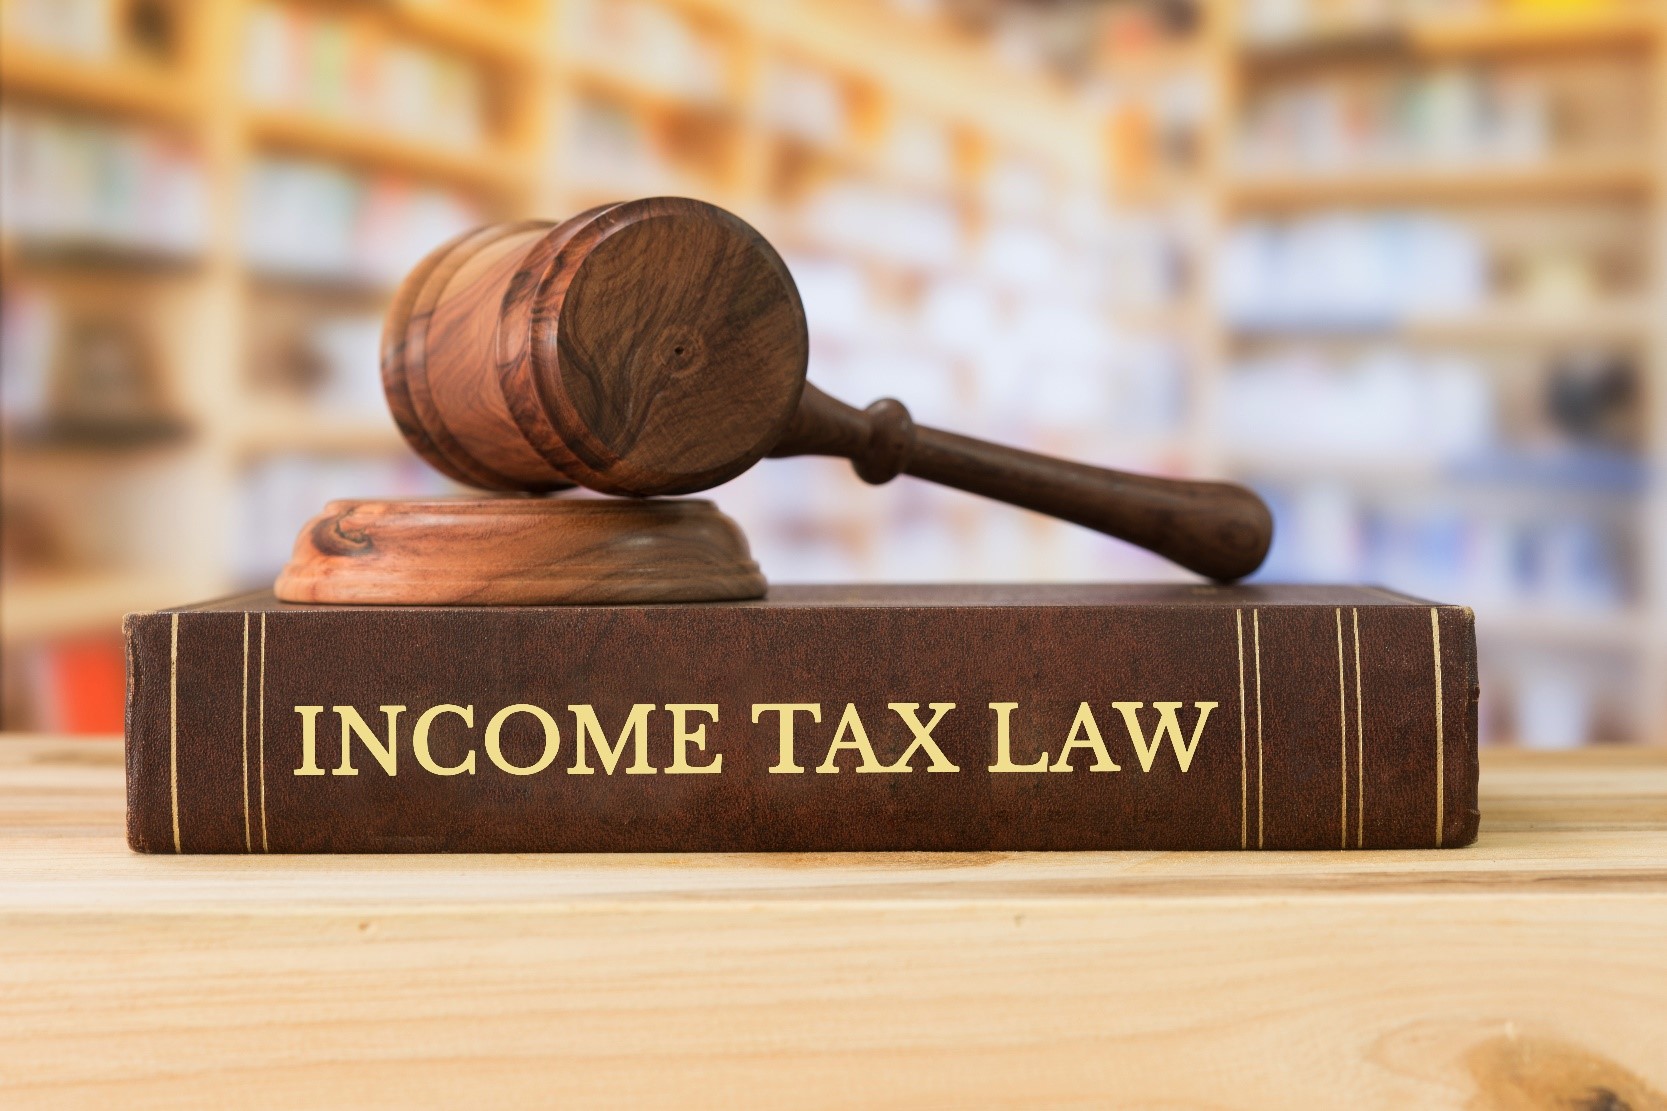 5 things to keep in mind to ensure you are not breaking income tax laws